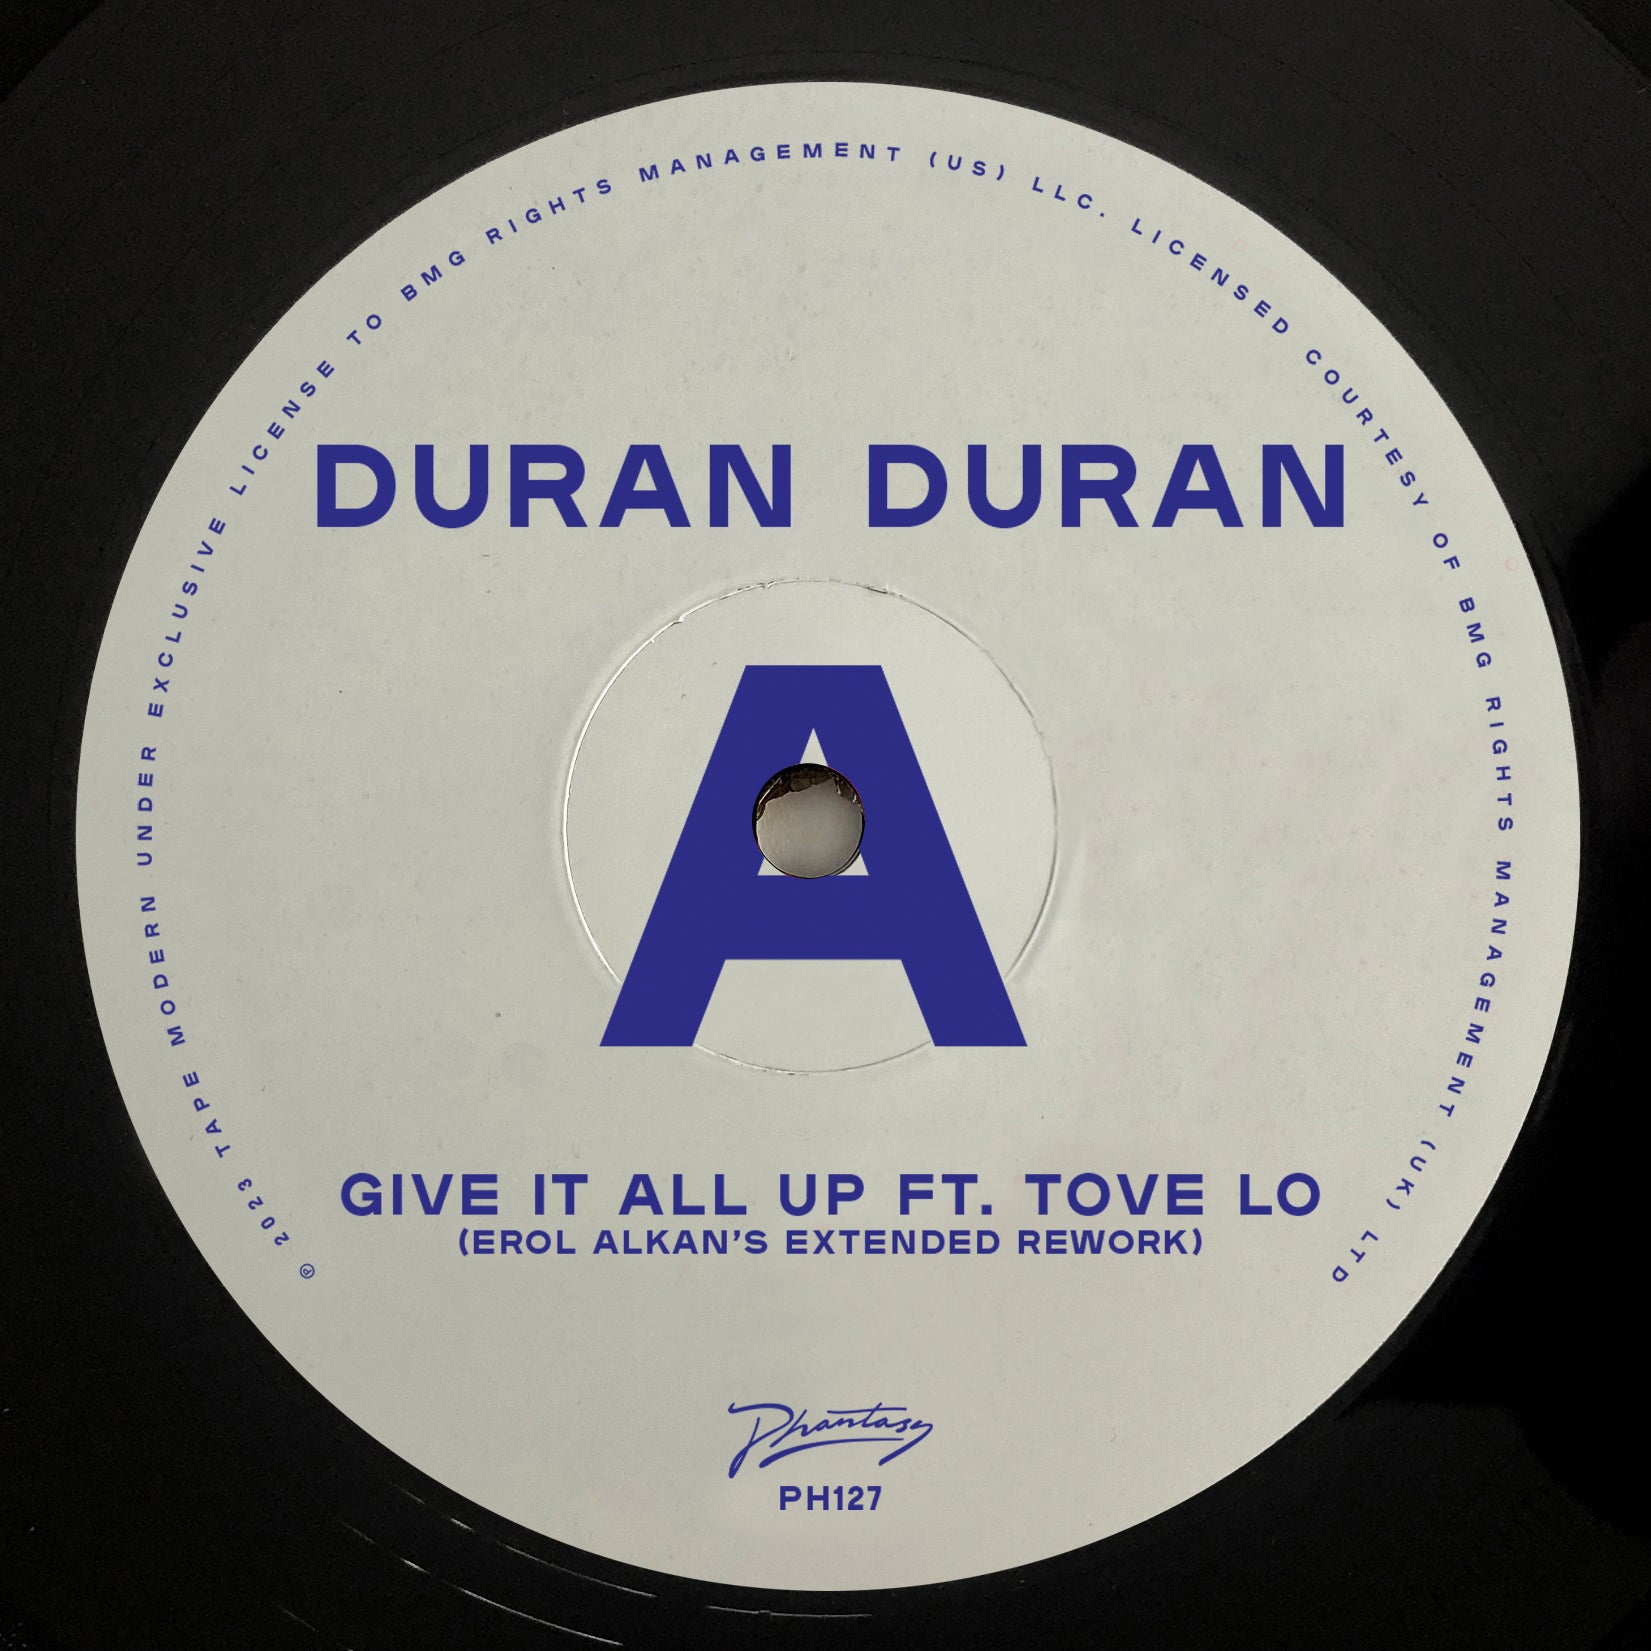 DURAN DURAN / GIVE IT ALL UP FT. TOVE LO